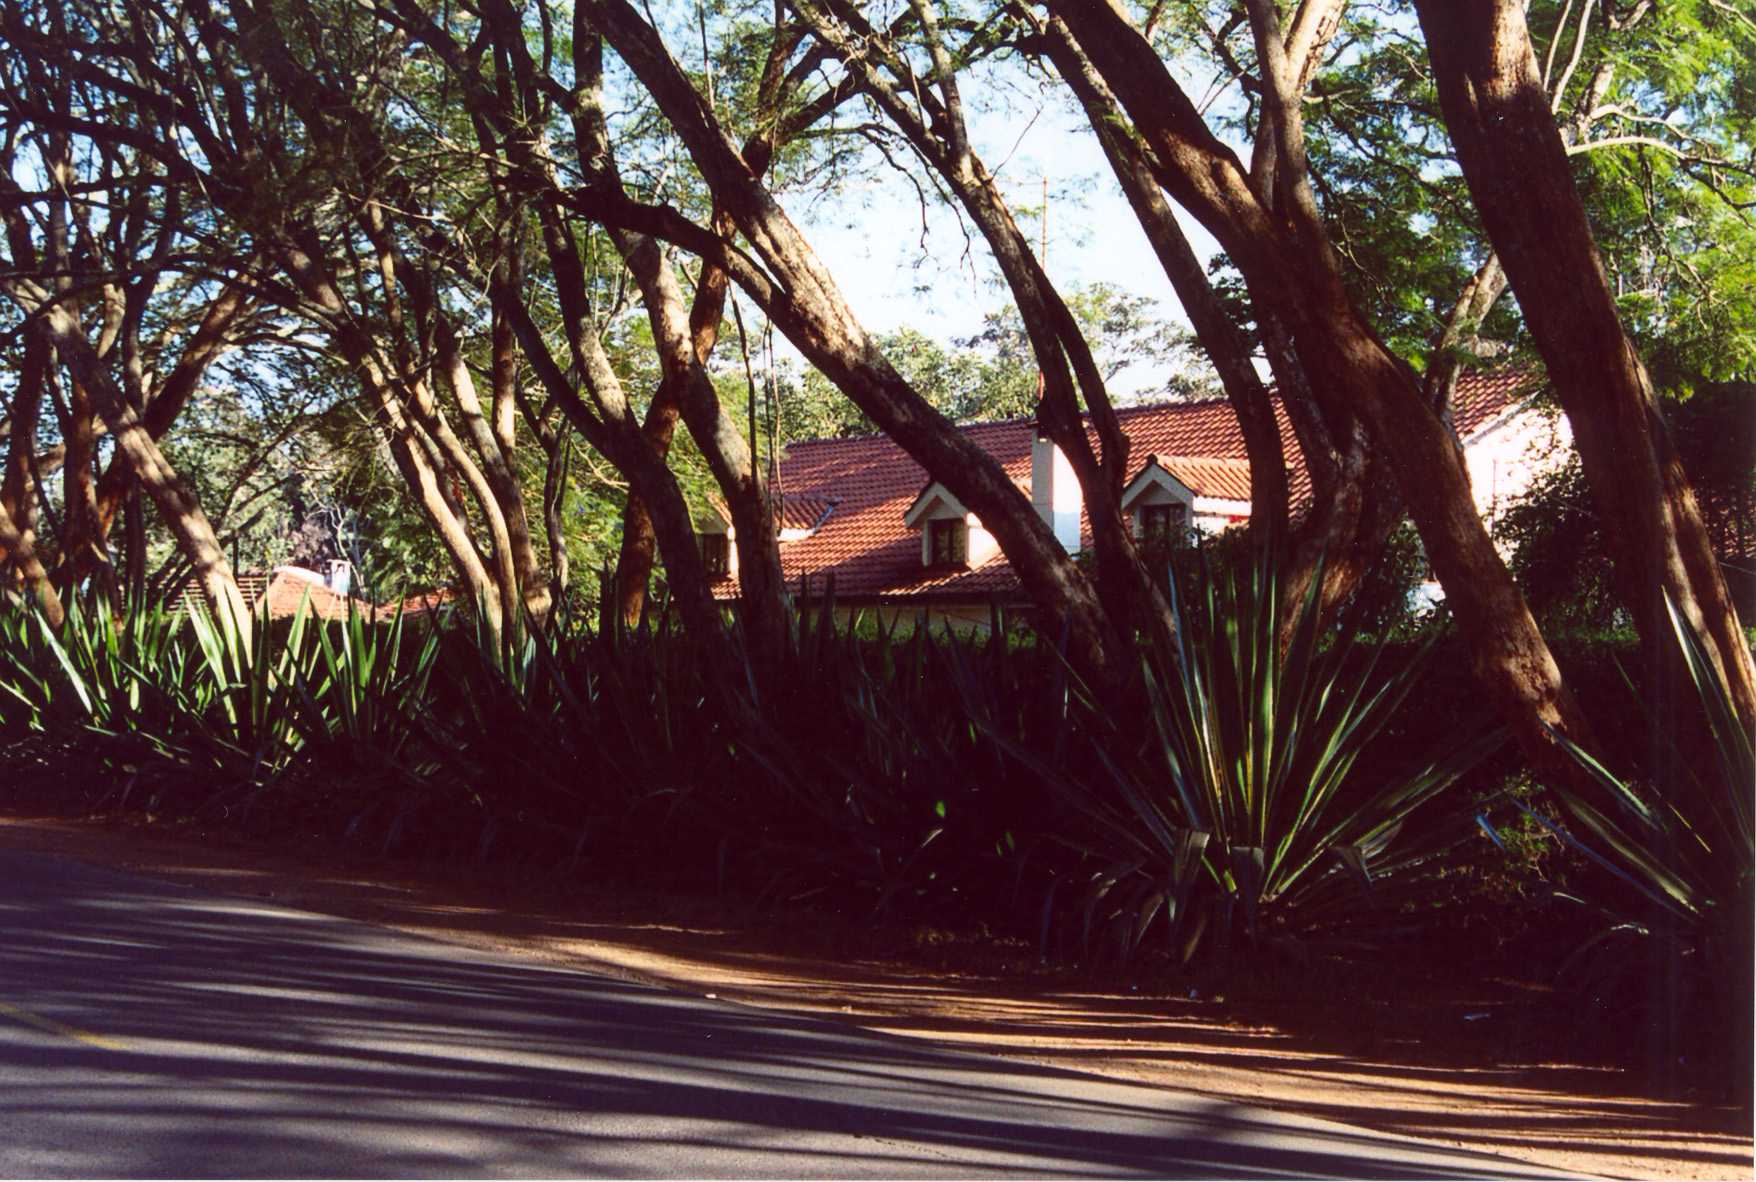 Riverside - Nice house behind plant wall (July 2003)